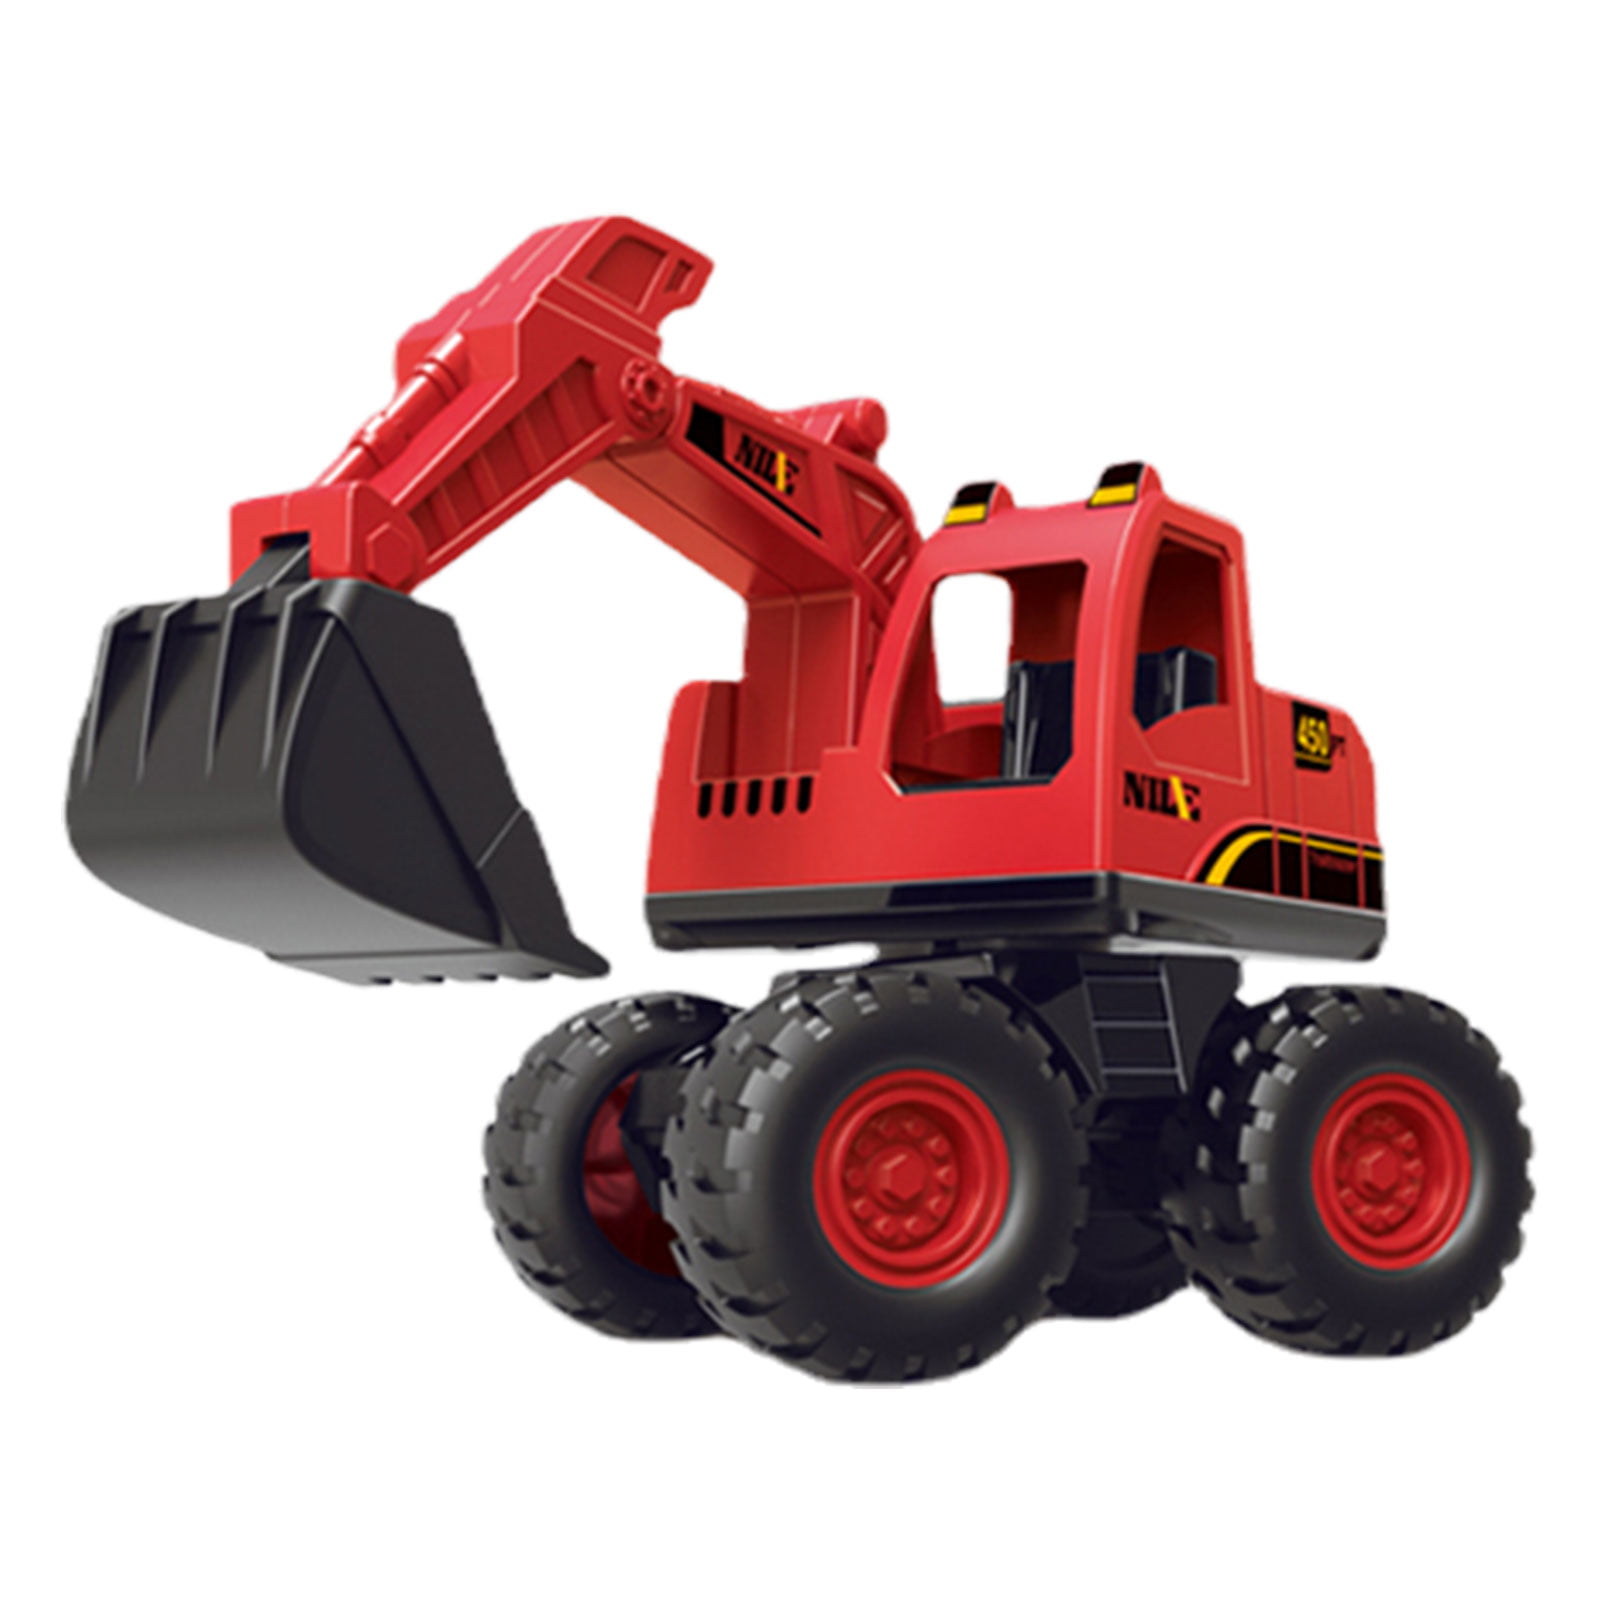 Engineering Vehicle Toys - Construction Truck Toys - Construction ...